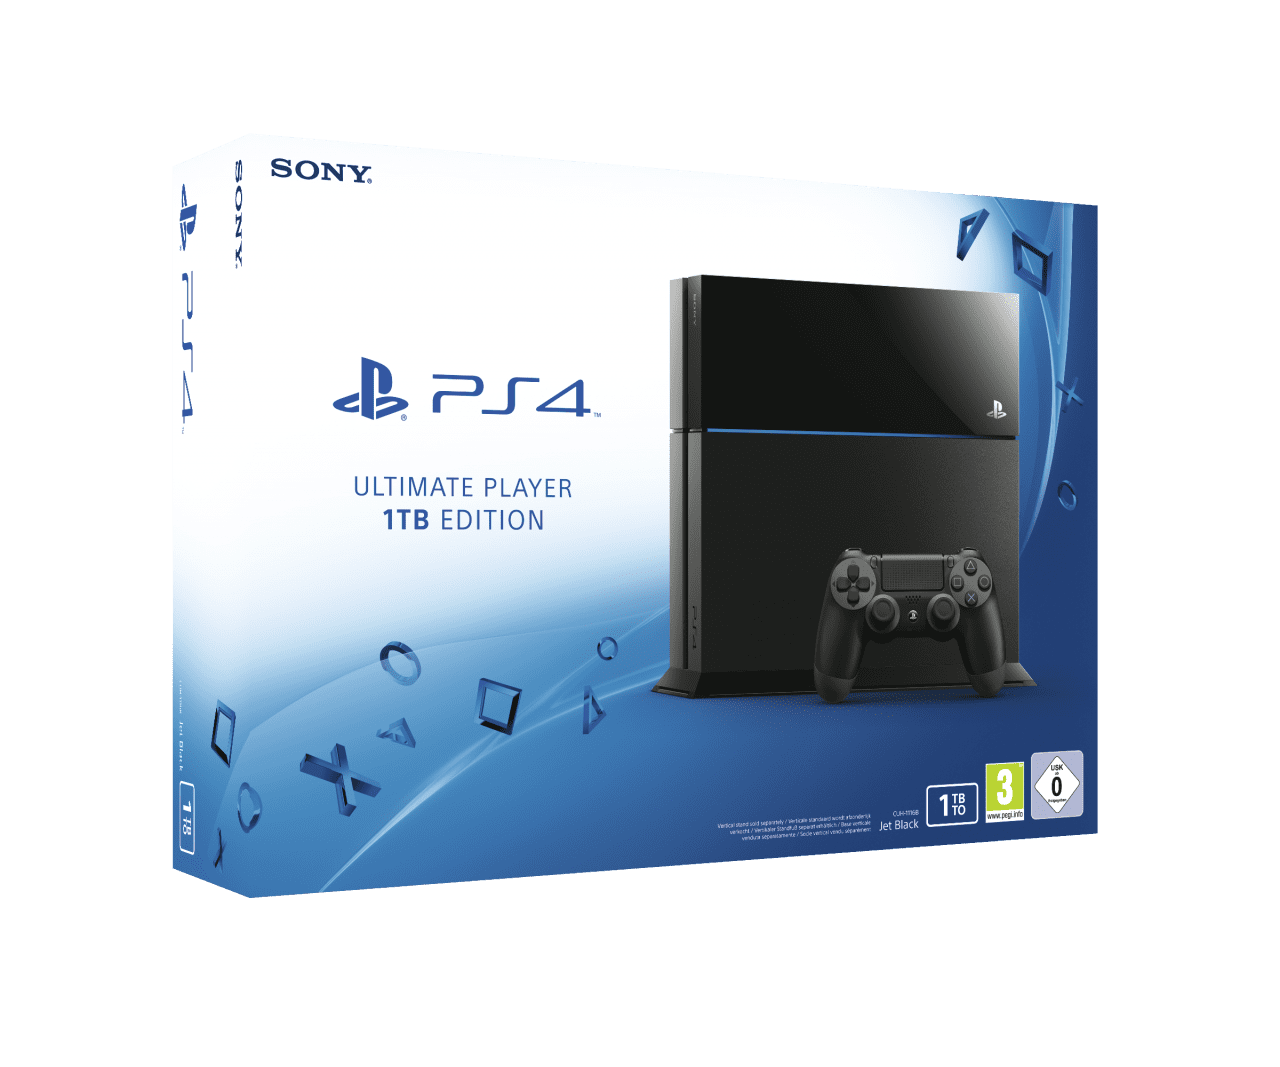 Officialy – Αυτό είναι το νέο PS4…